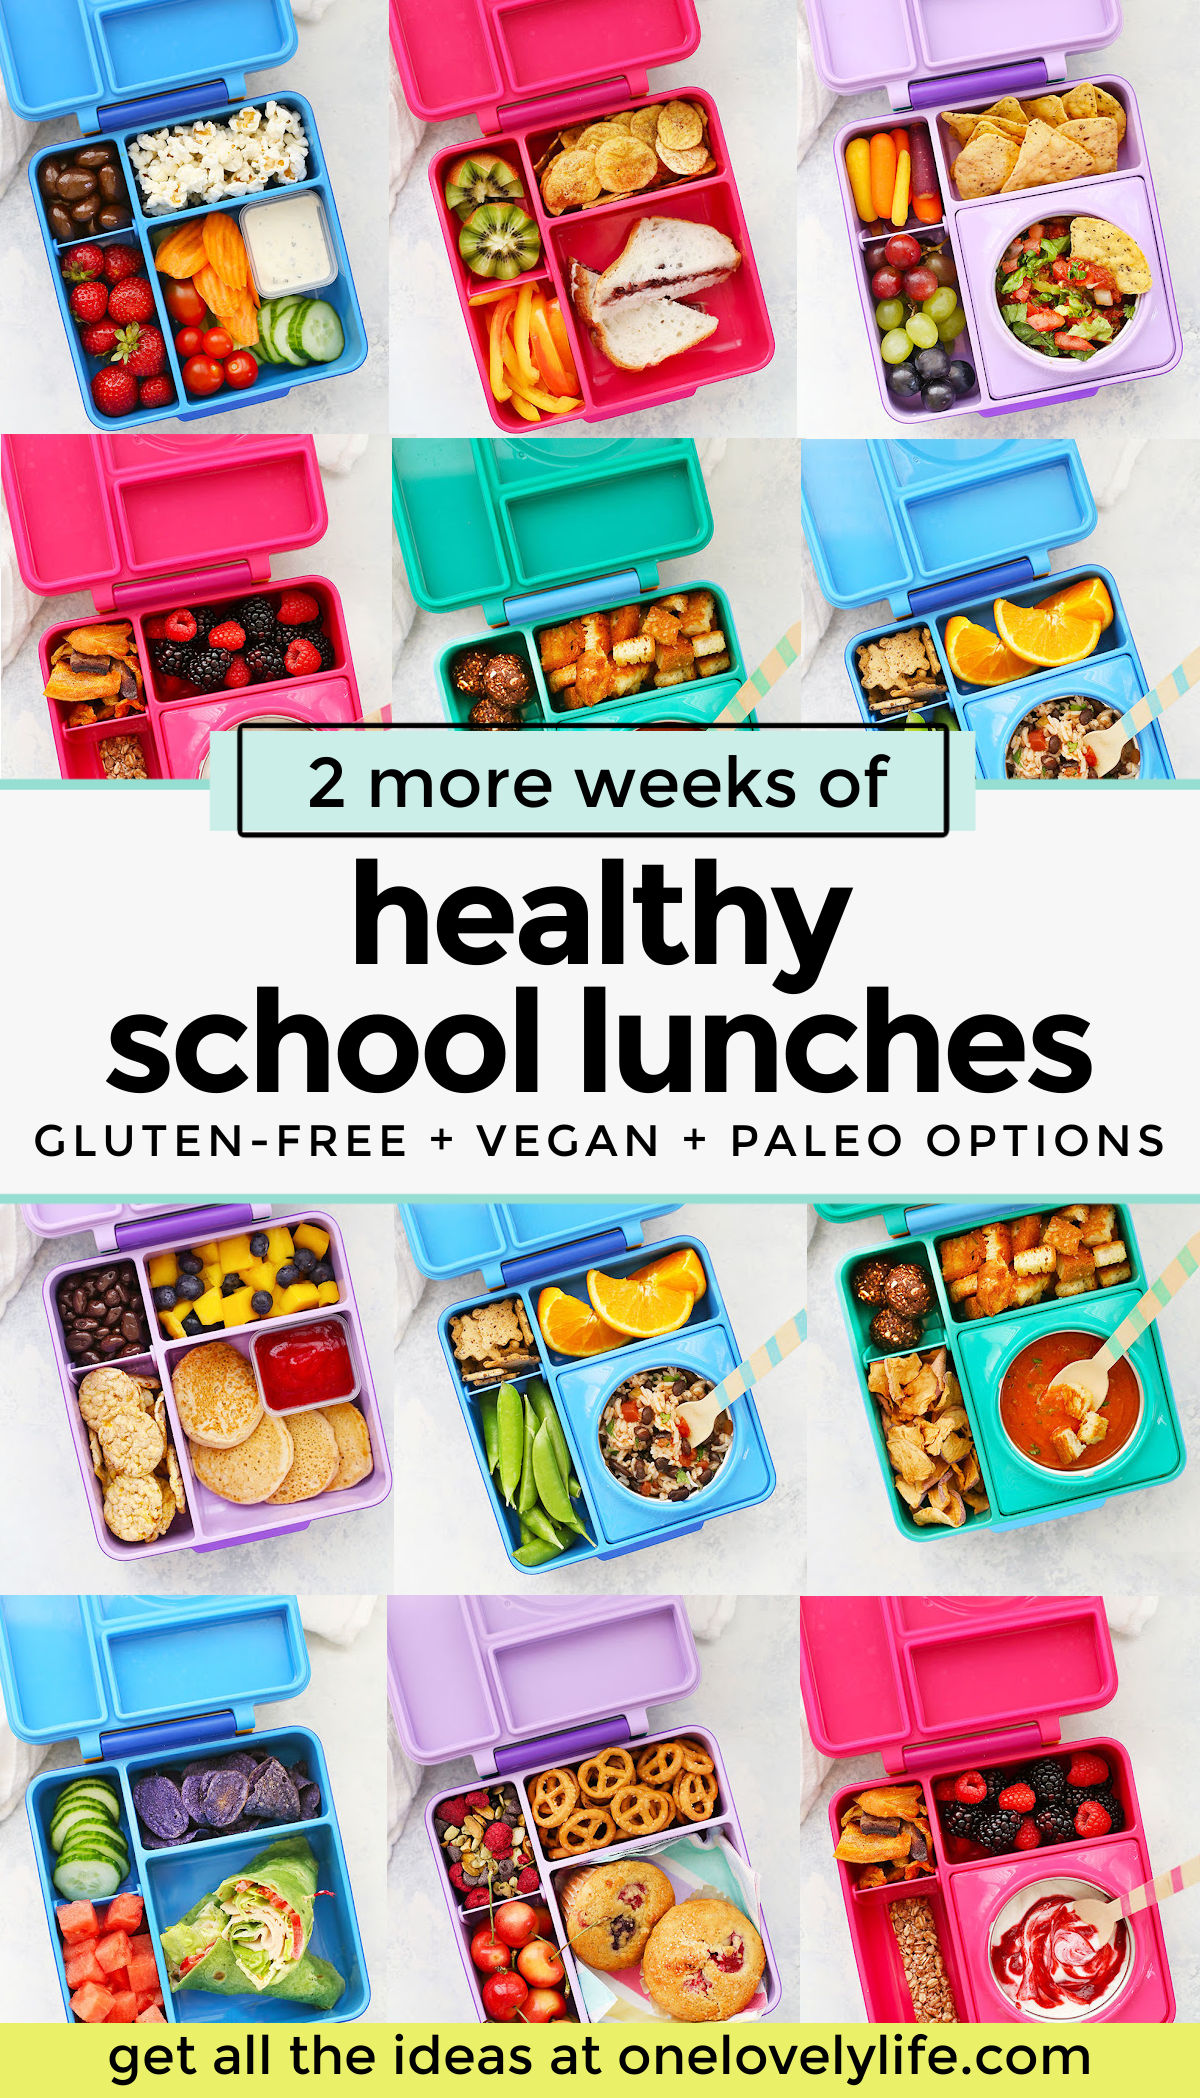 2 Weeks of Healthy School Lunches! These gluten free, dairy free school lunch ideas are all kid-tested and DELICIOUS! // School lunches // school lunch ideas // gluten free school lunches // dairy free school lunches // vegan school lunches, paleo school lunches // gluten free packed lunches // healthy packed lunches // healthy school lunch // healthy kids lunches